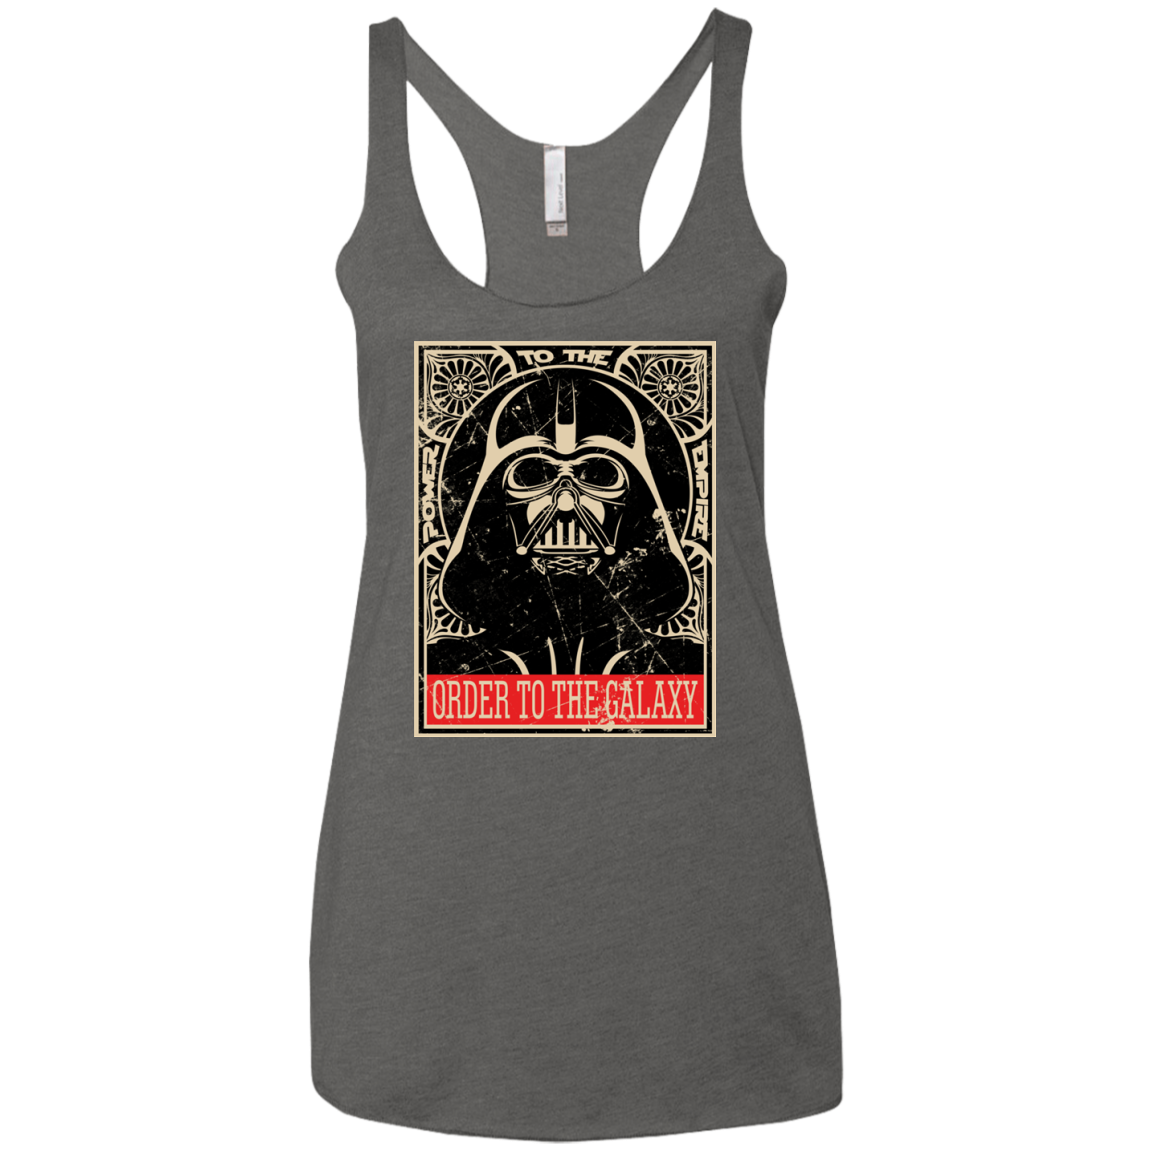 Order to the galaxy Women's Triblend Racerback Tank